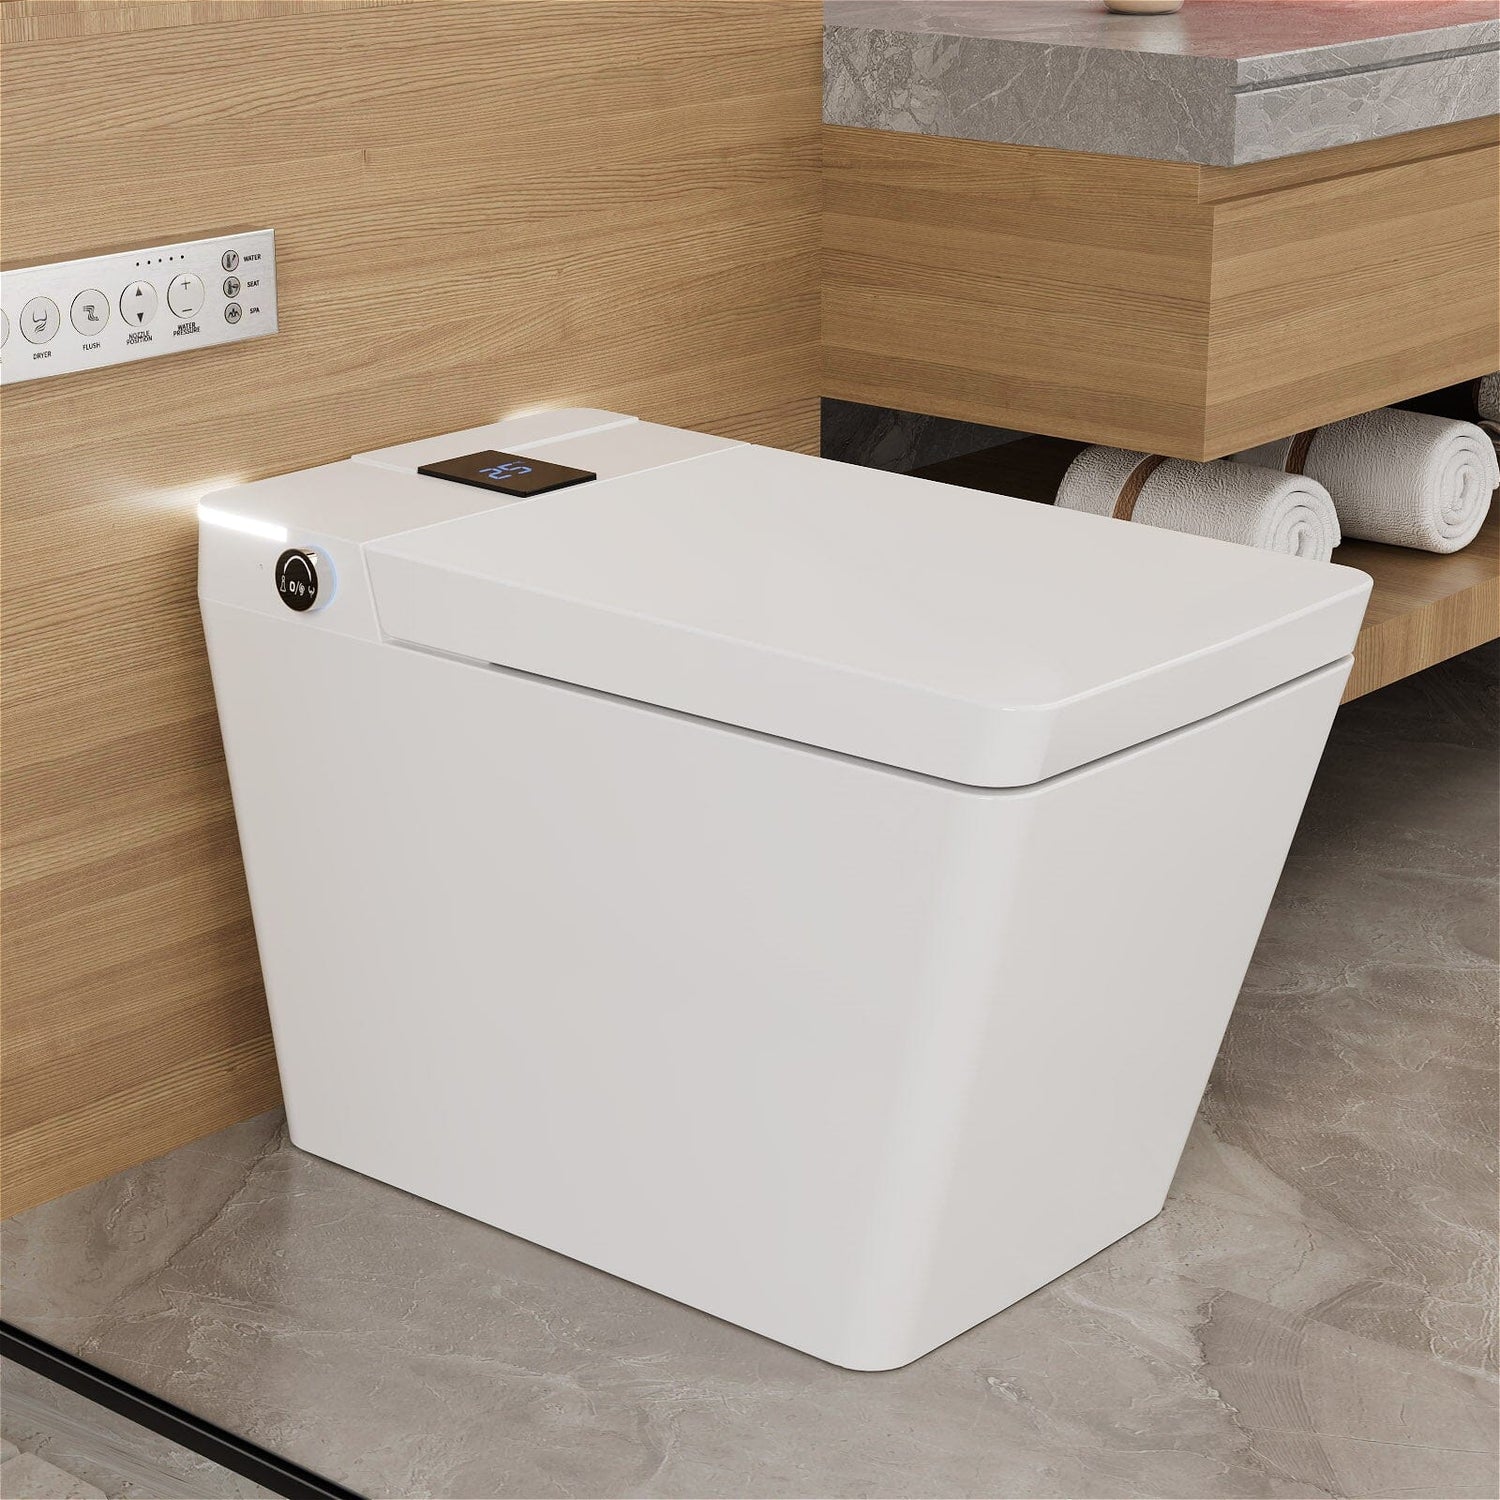 Shipping costs to replace with a white smart toilet